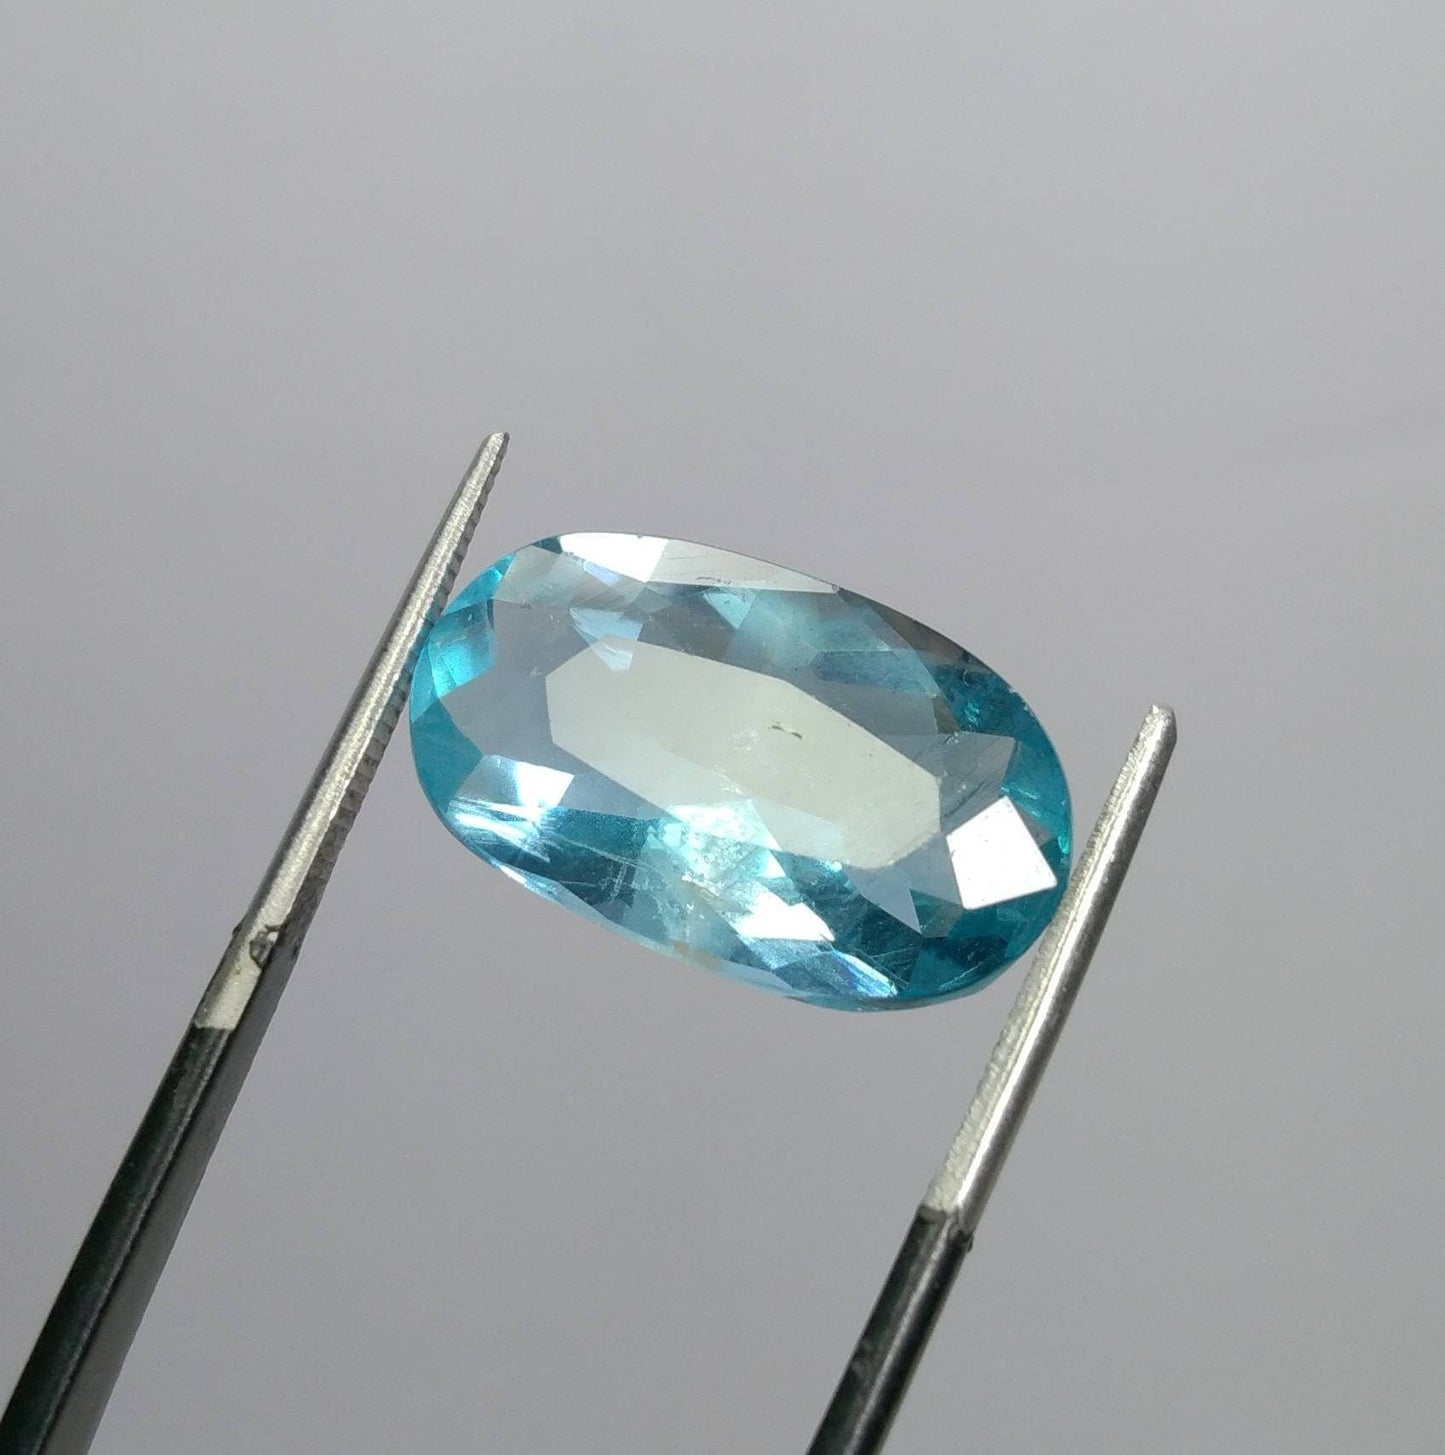 ARSAA GEMS AND MINERALSNatural fine quality beautiful 9.5 carats aesthetic deep blue faceted oval cut shape fluorite gem - Premium  from ARSAA GEMS AND MINERALS - Just $19.00! Shop now at ARSAA GEMS AND MINERALS